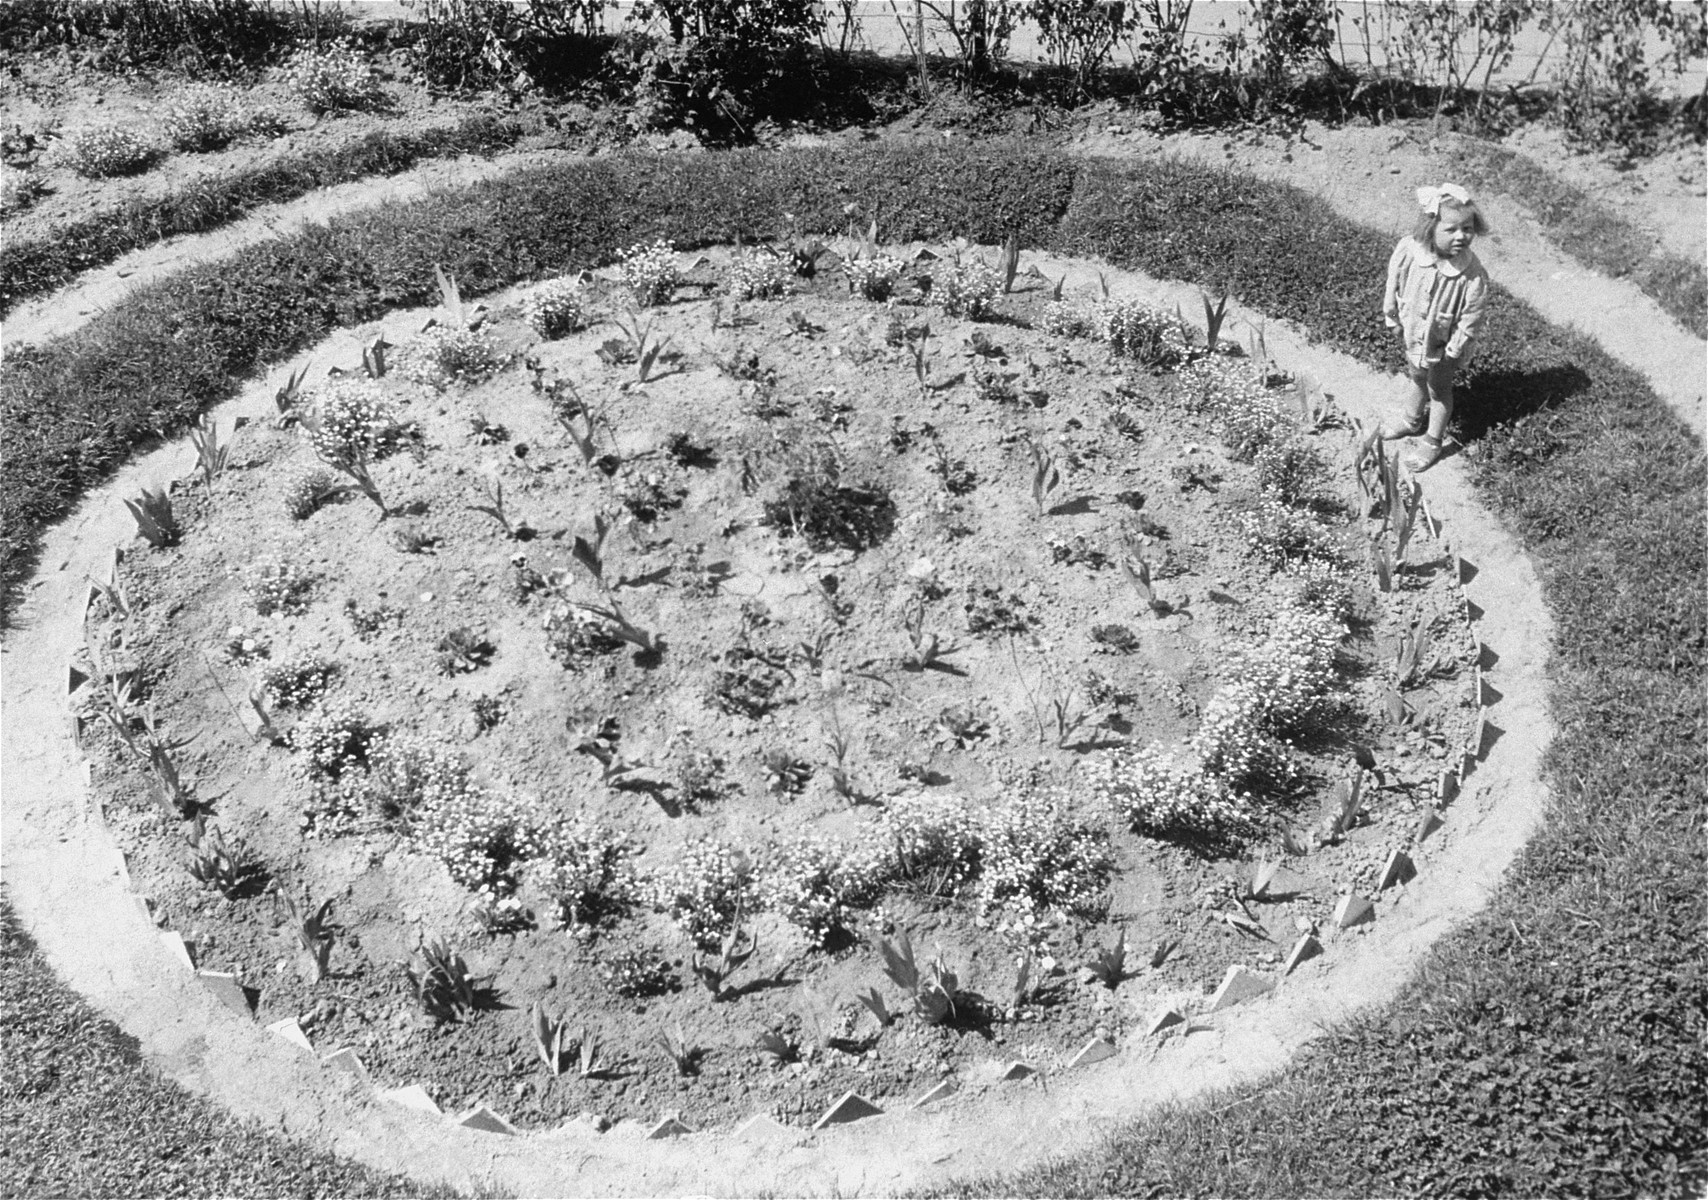 A small child stands in a garden at Bindermichl DP camp.